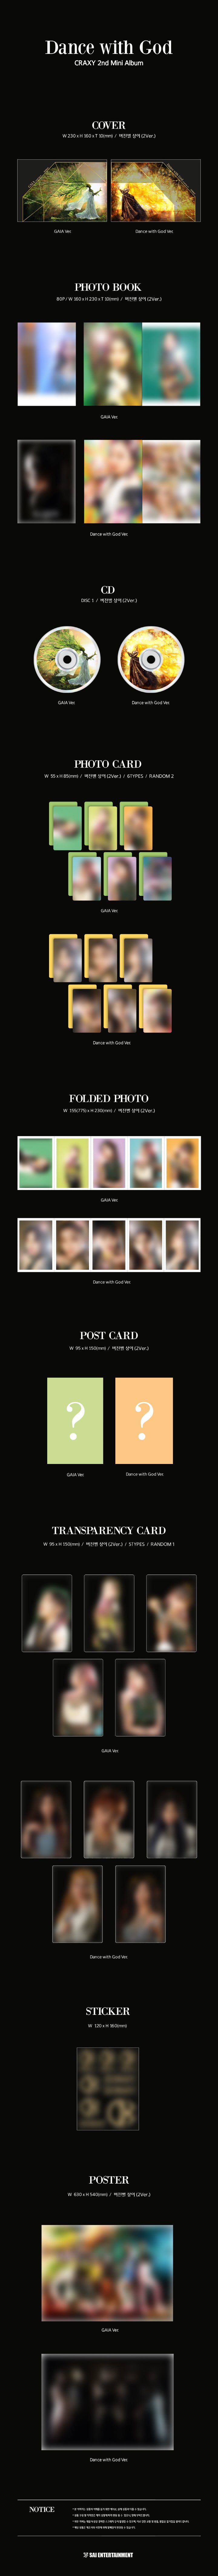 1 CD
1 Photo Book (80 pages)
2 Photo Cards (random out of 6 types)
1 Folded Photo
1 Postcard
1 Transparency Card (random o...